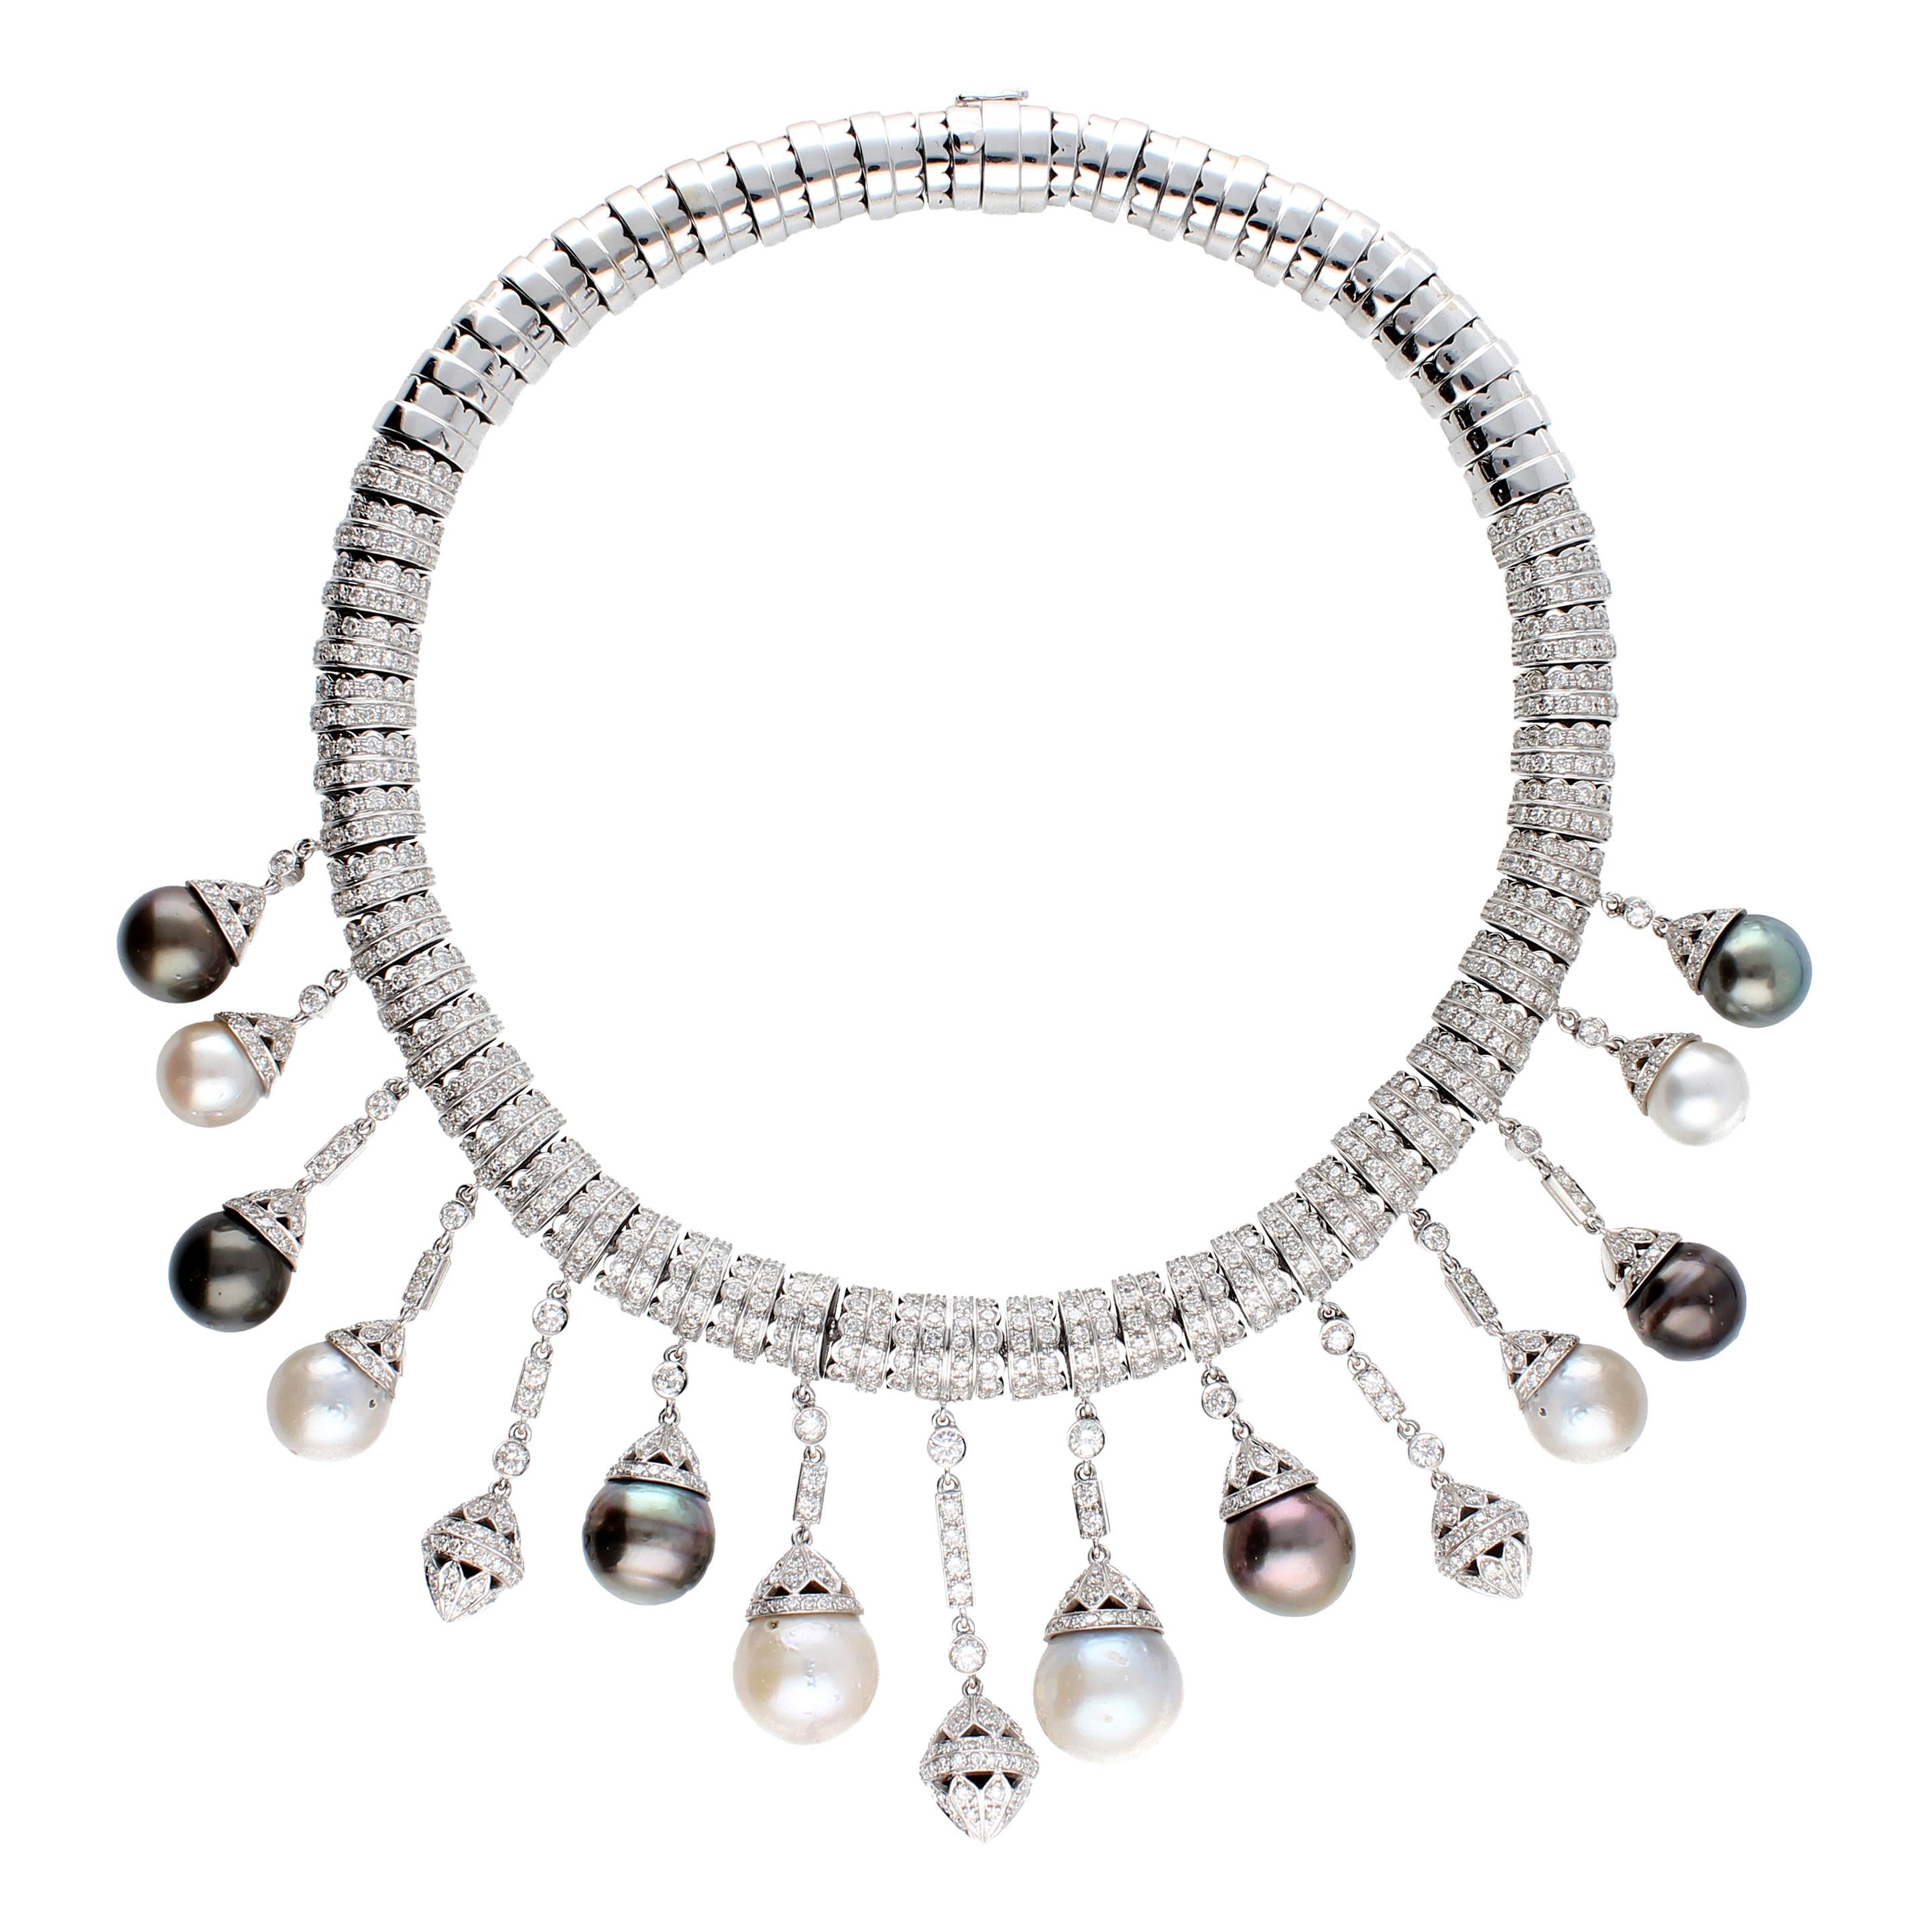 Necklace White Gold and Diamonds, Pendants with White and Black Pearls S.S.